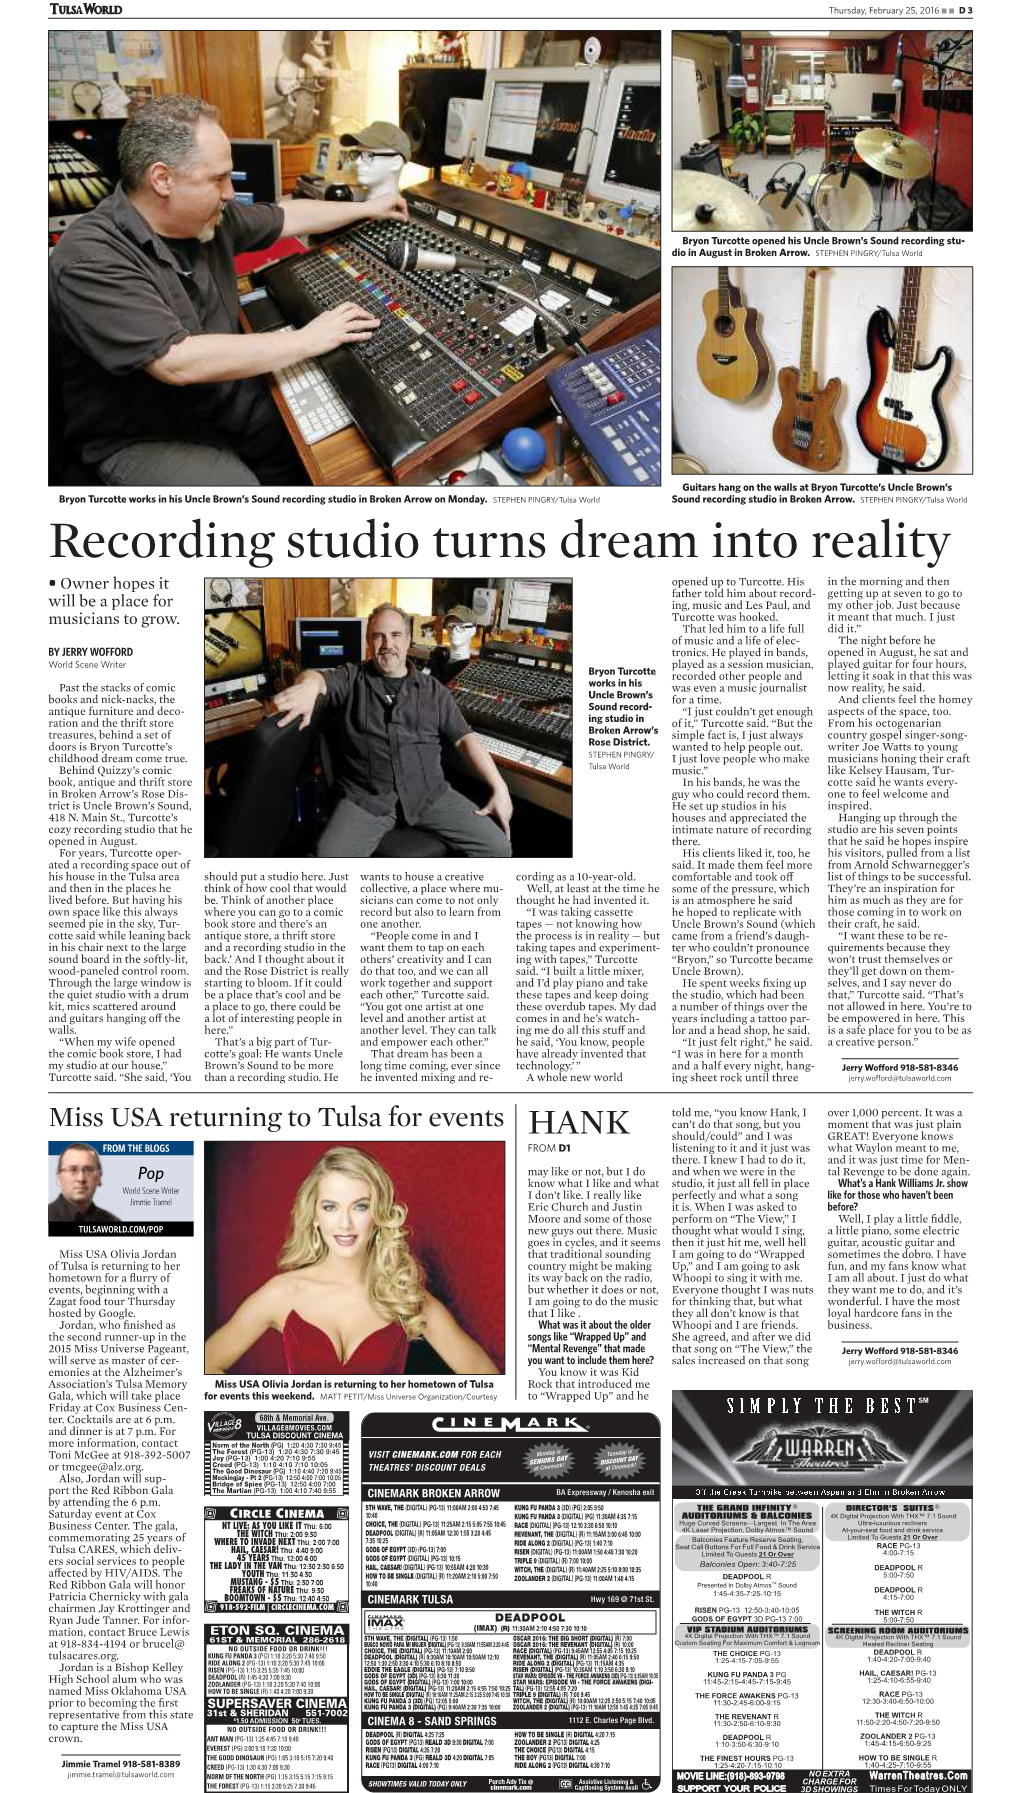 Recording Studio Turns Dream Into Reality ••Owner Hopes It Opened up to Turcotte